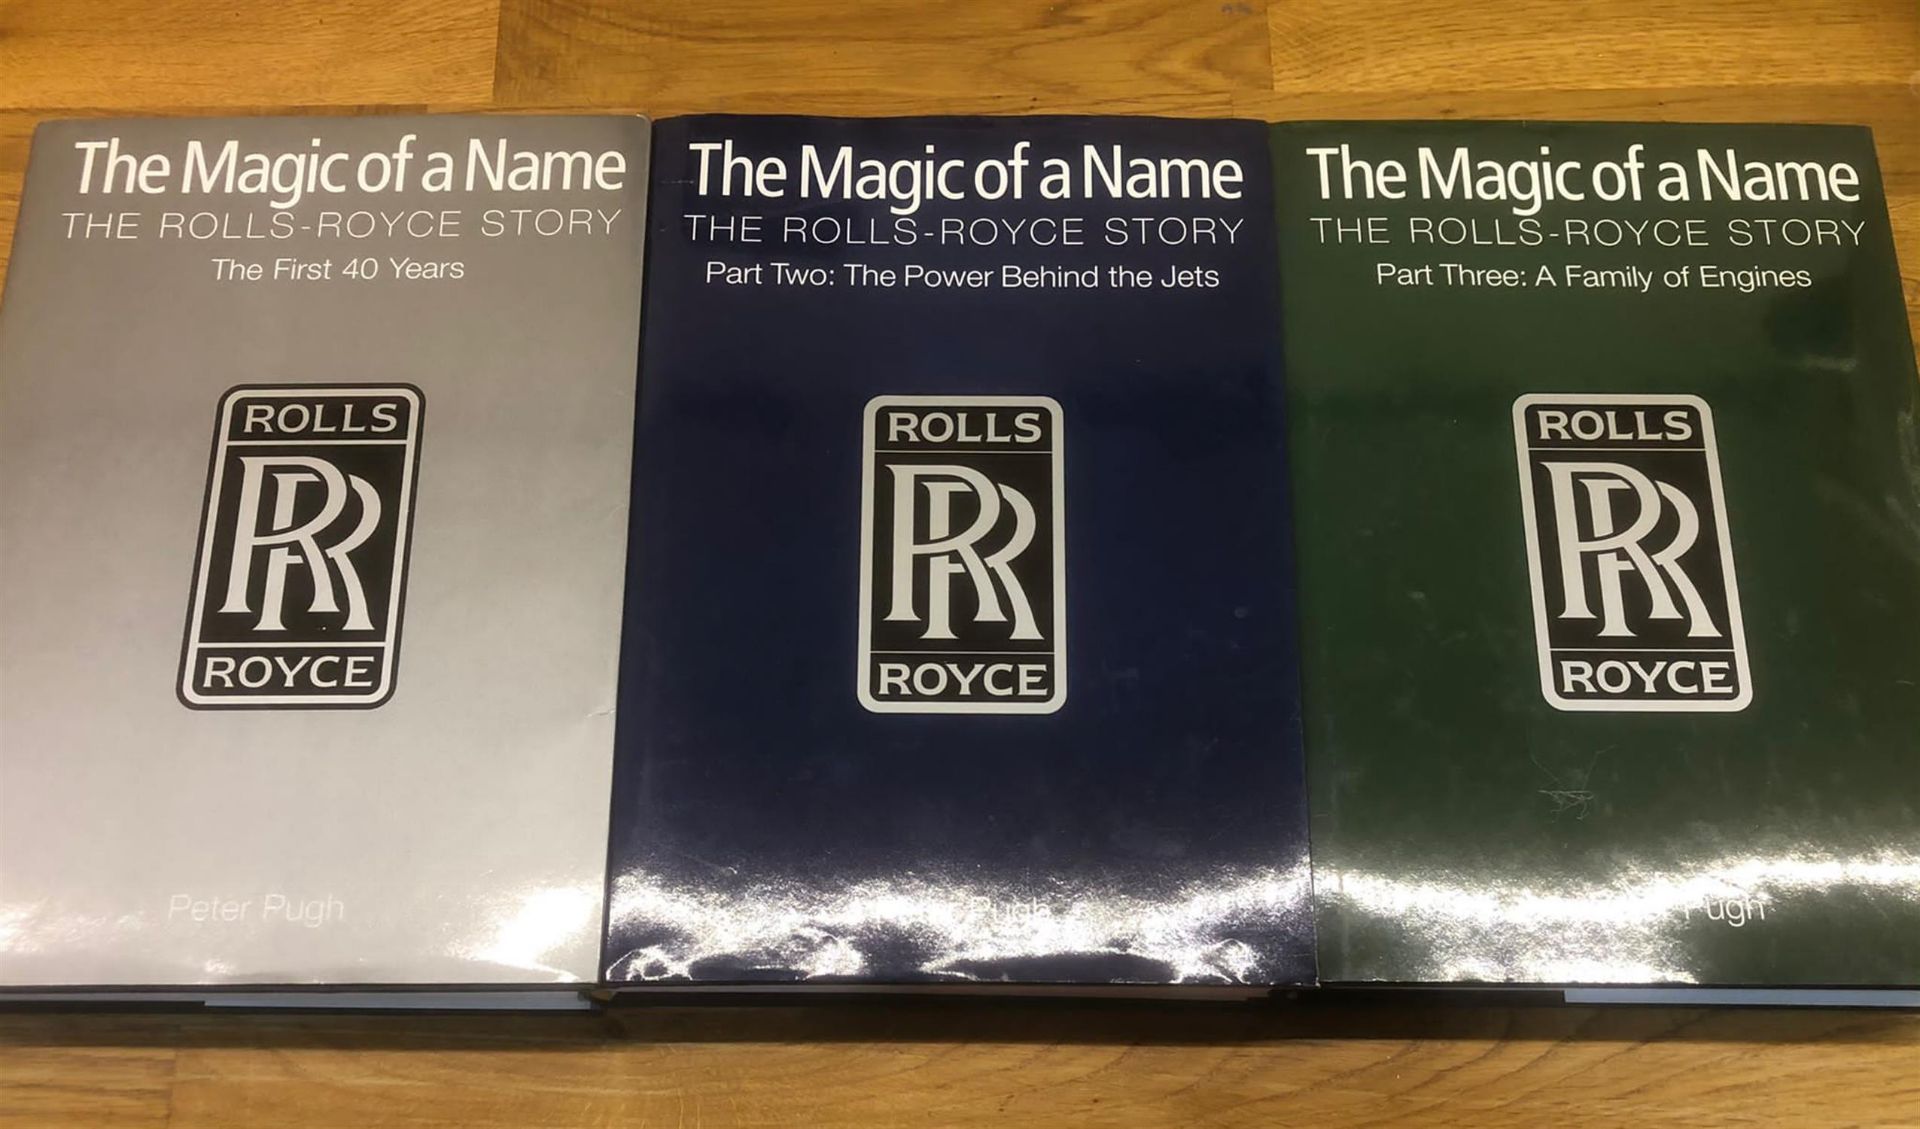 'The Magic of a Name' - The Rolls-Royce Story - Image 3 of 4